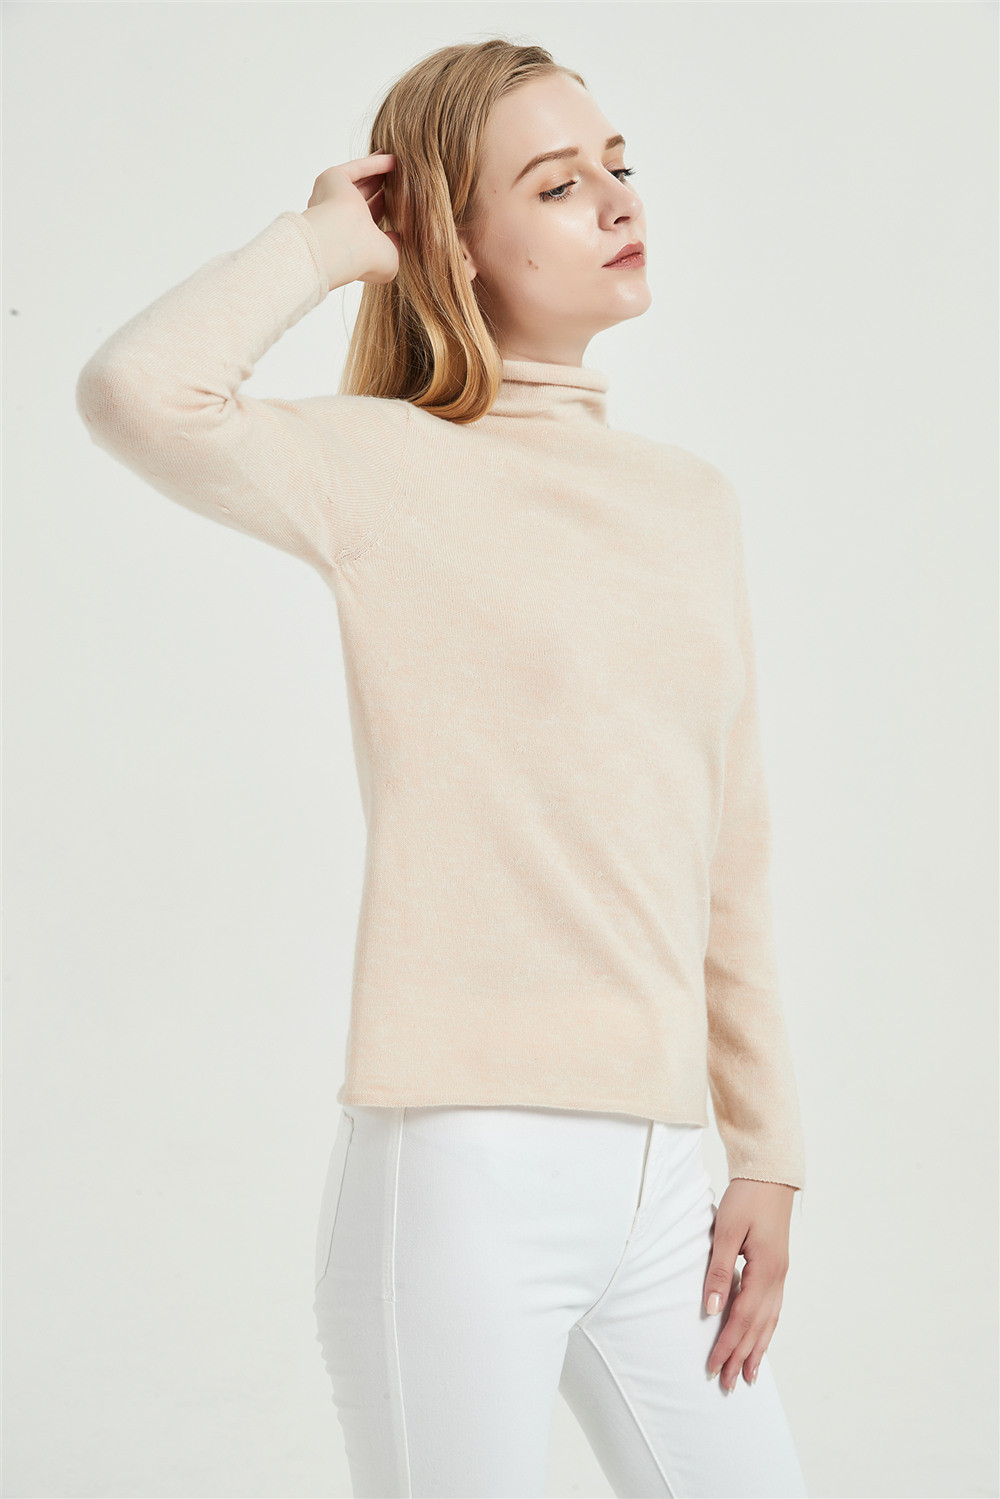 wholesale high quality cashmere seamless sweater with OEM service and ...